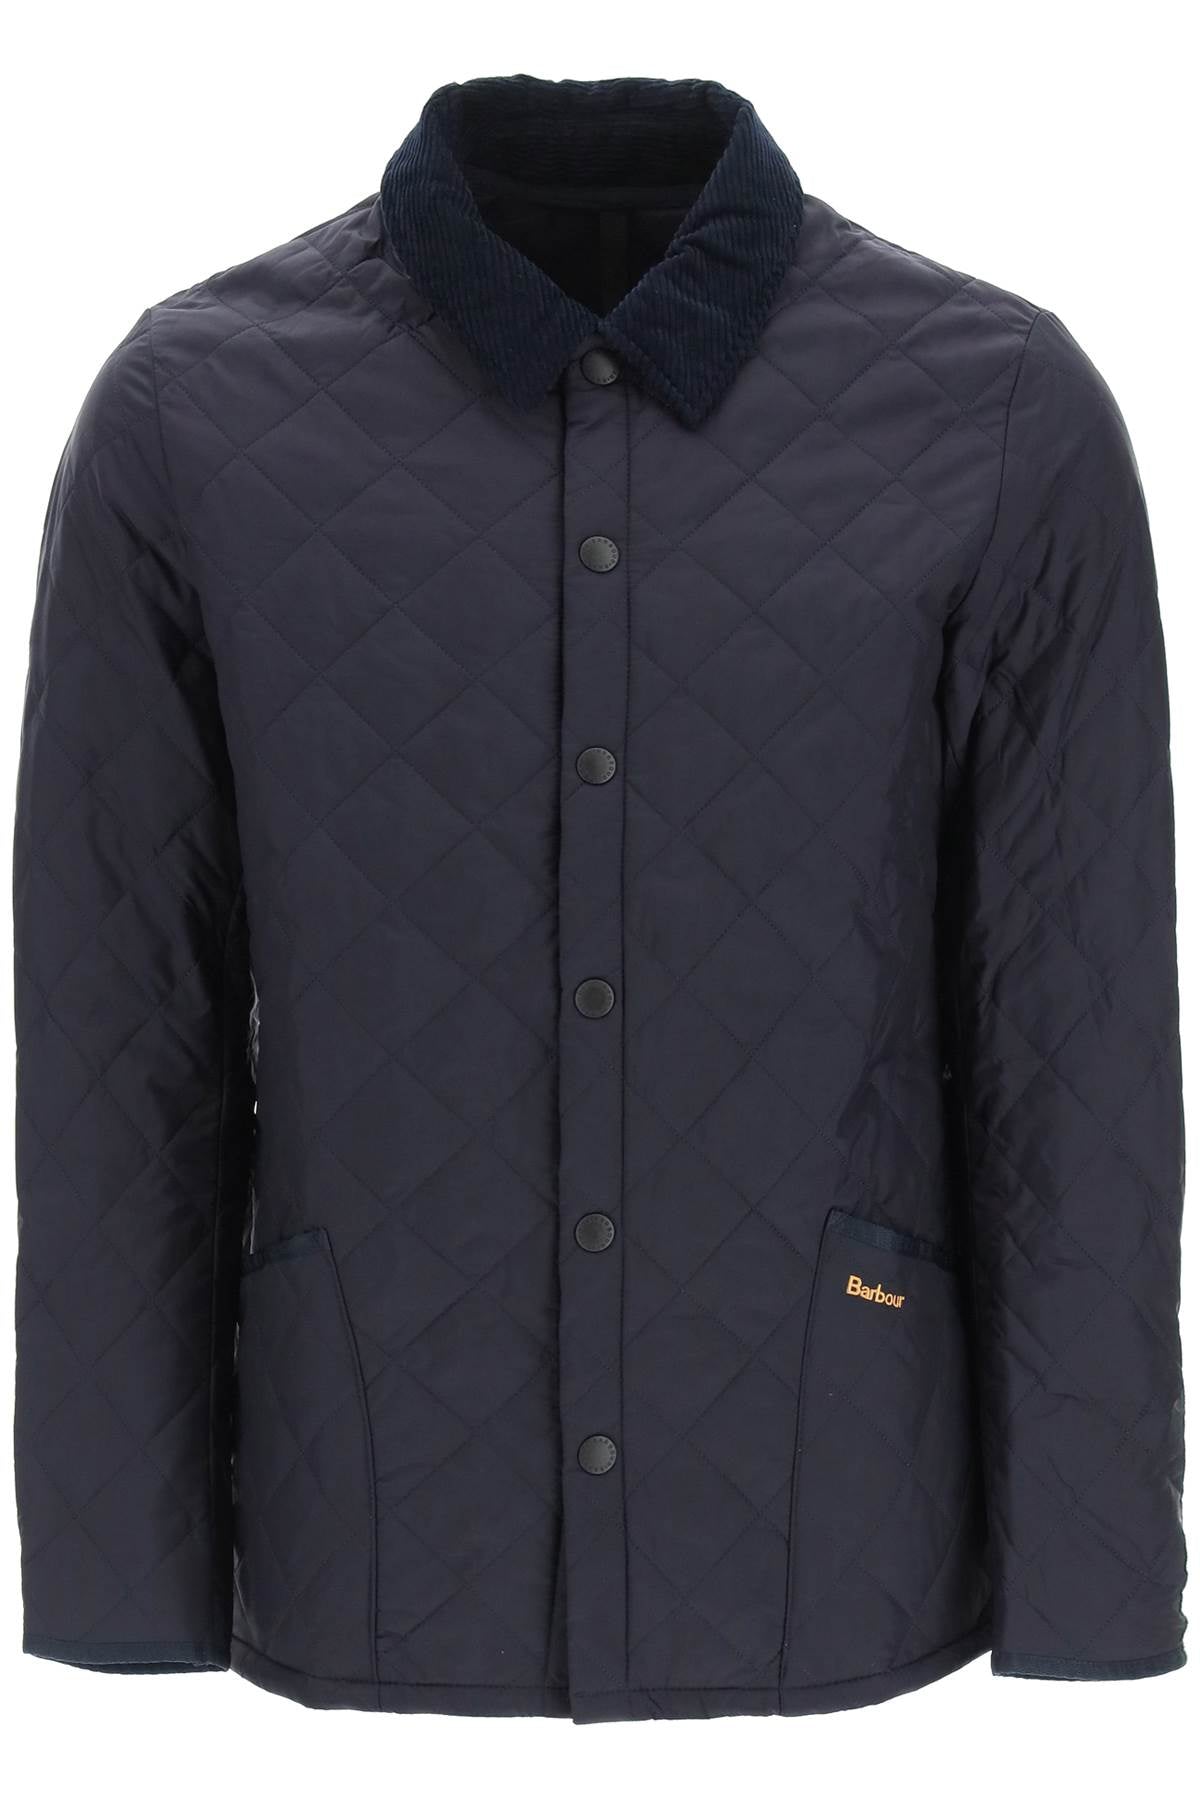 Barbour heritage liddesdale quilted jacket-0